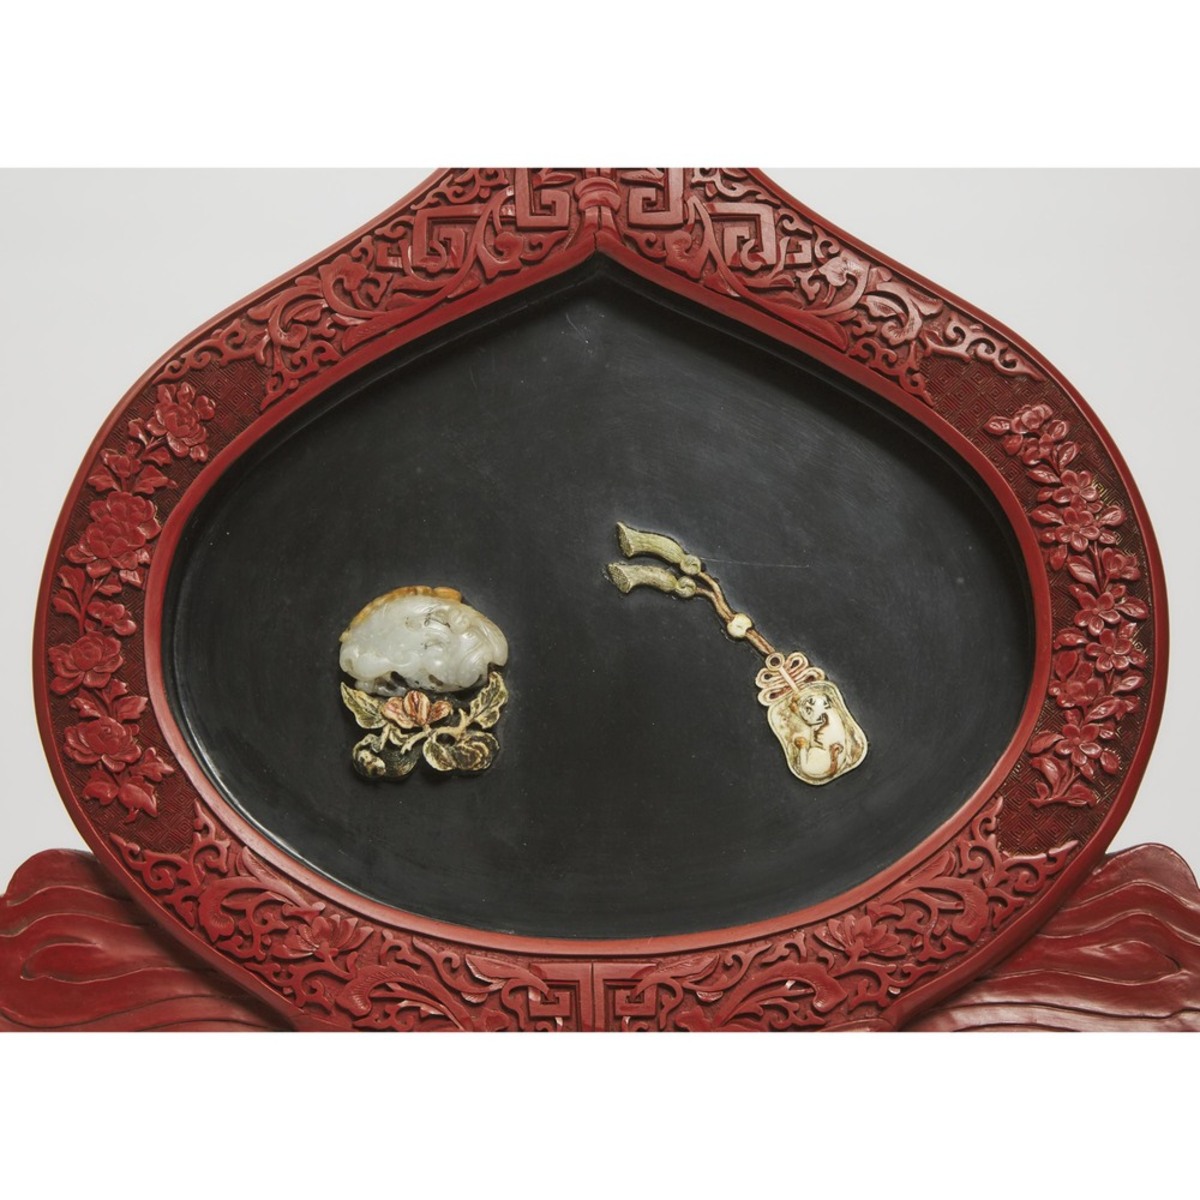 A Pair of Red Lacquer Panels Inlaid With Jade and Precious Stones, 19th Century, 清 十九世纪 剔红嵌宝挂屏一对, he - Image 5 of 6